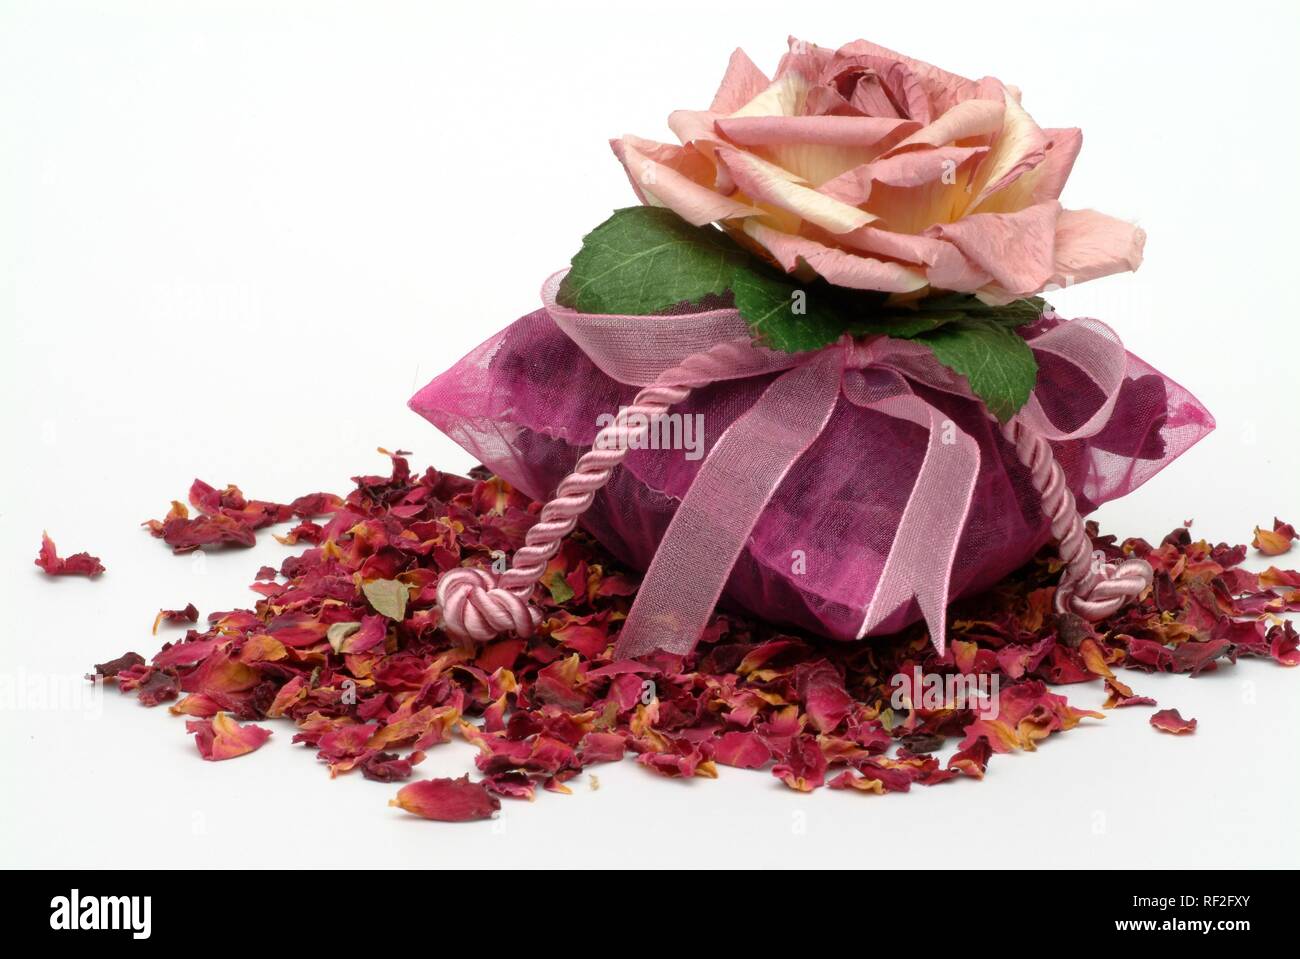 Sachet filled with rose petals Stock Photo